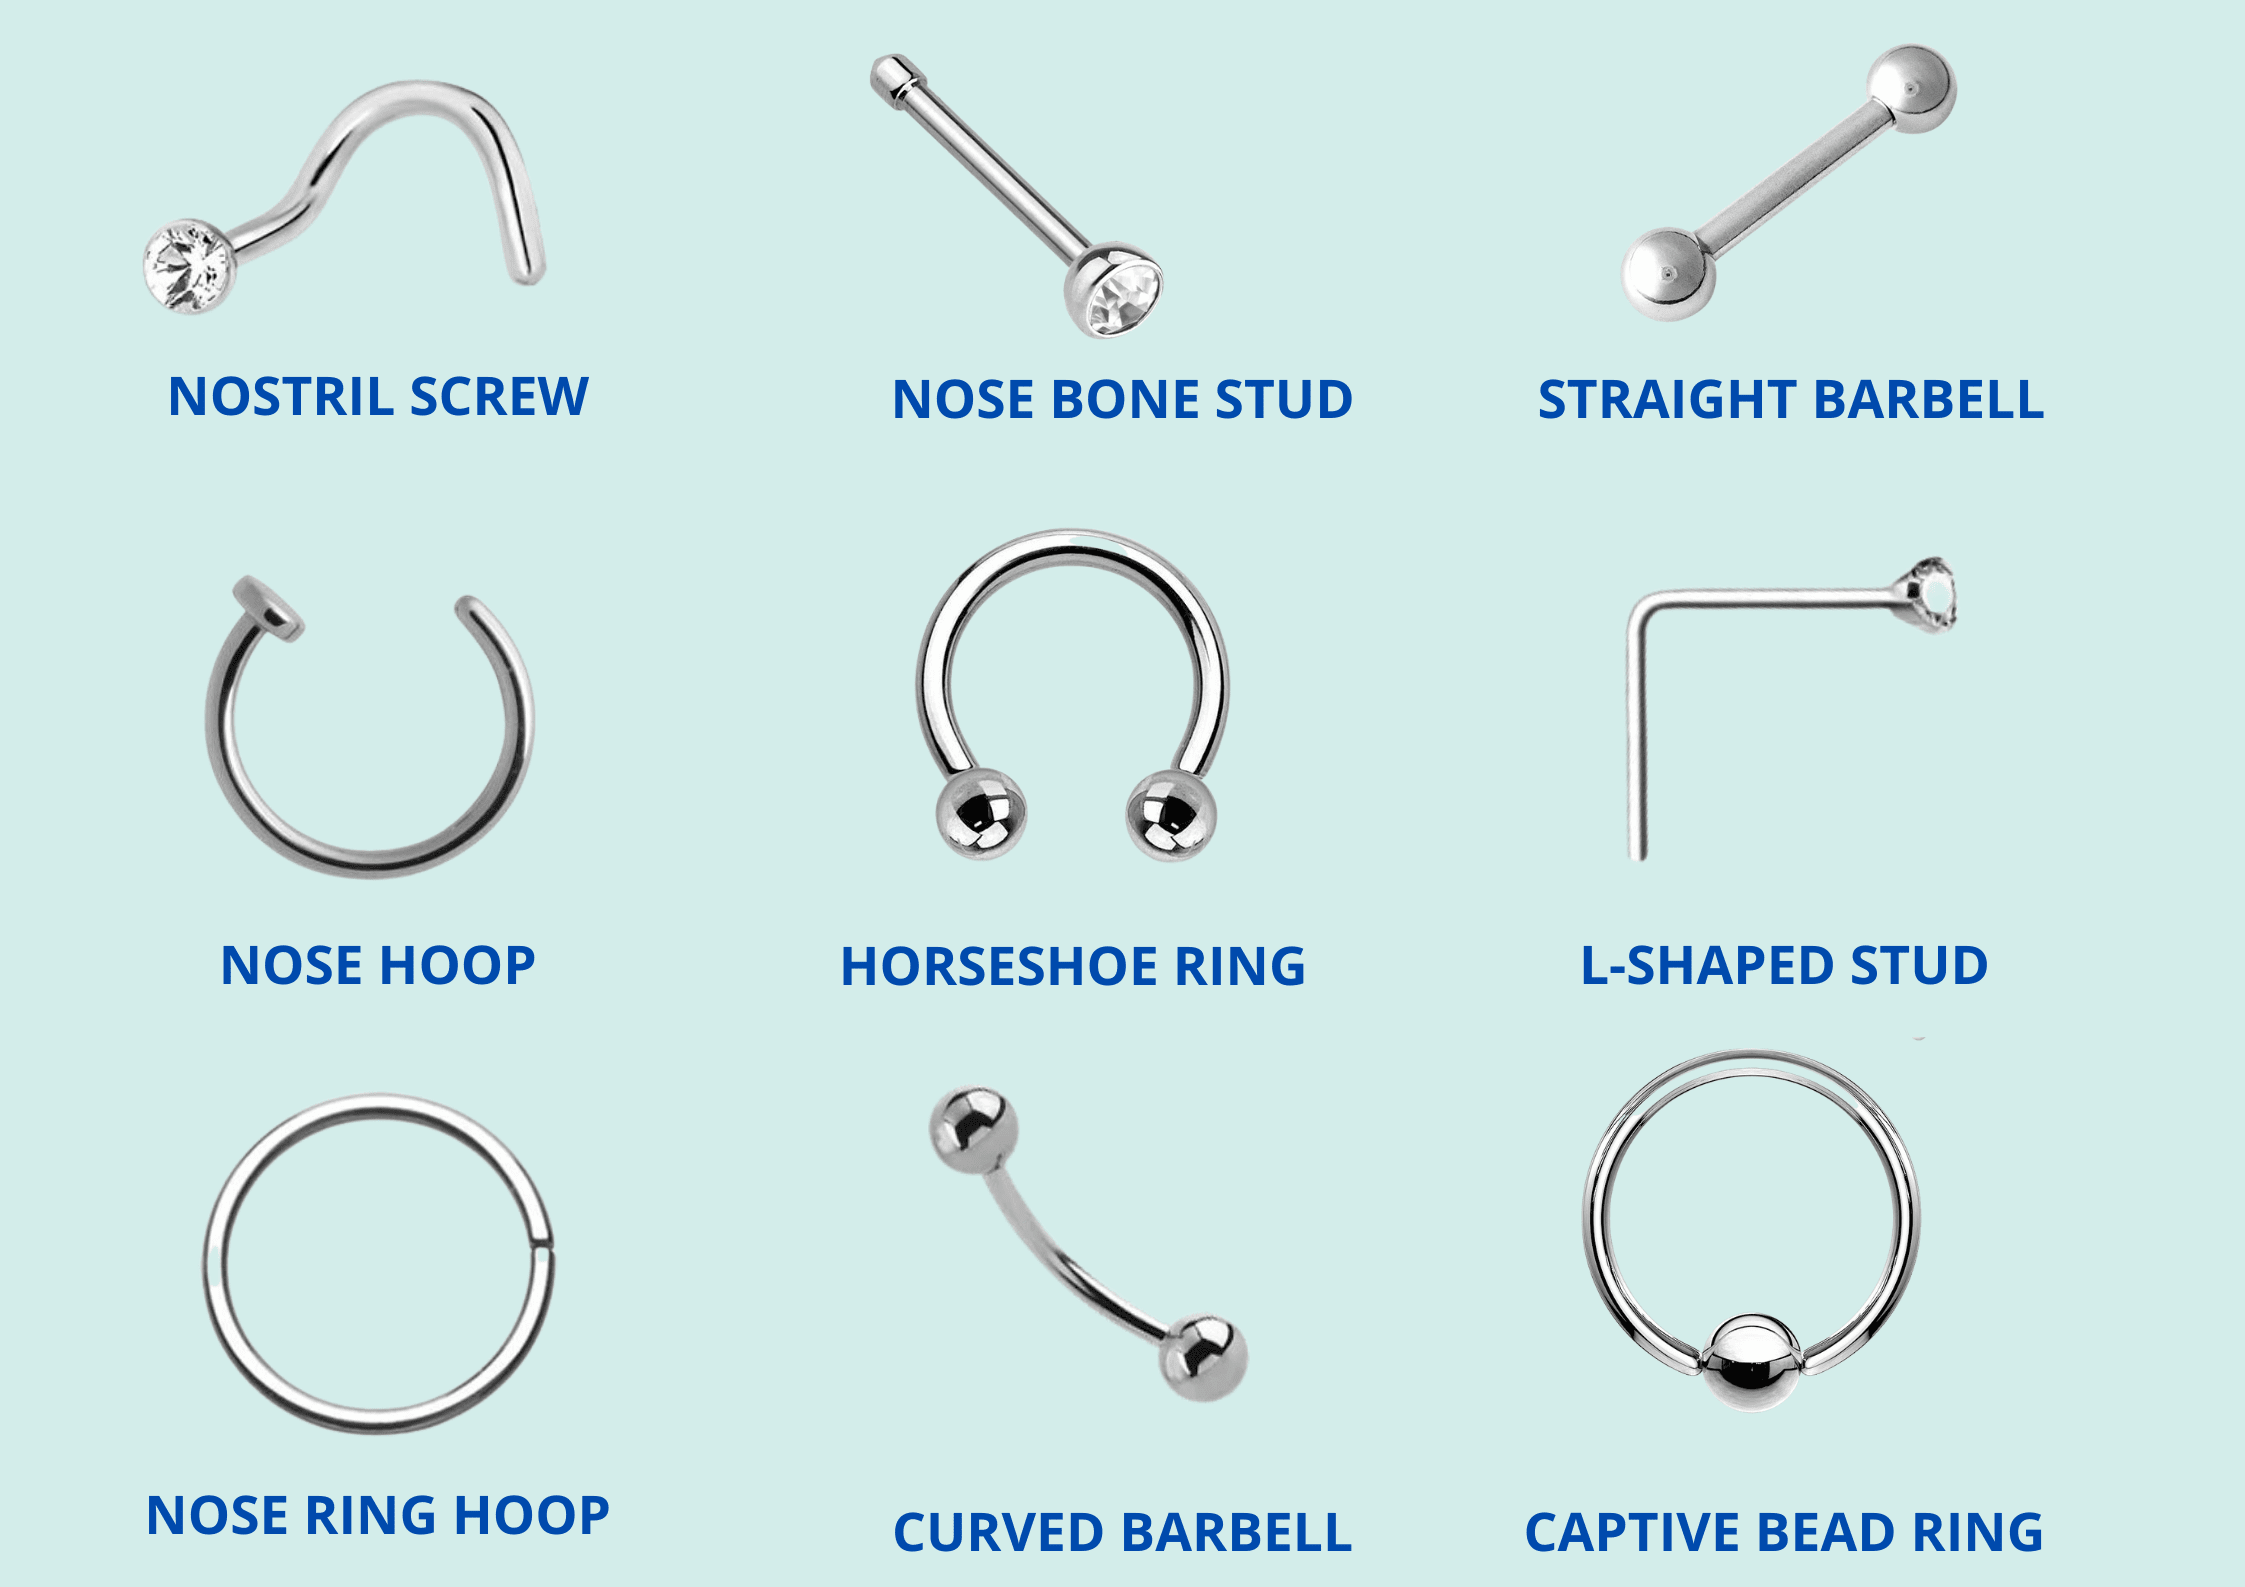 Types of nose jewelry